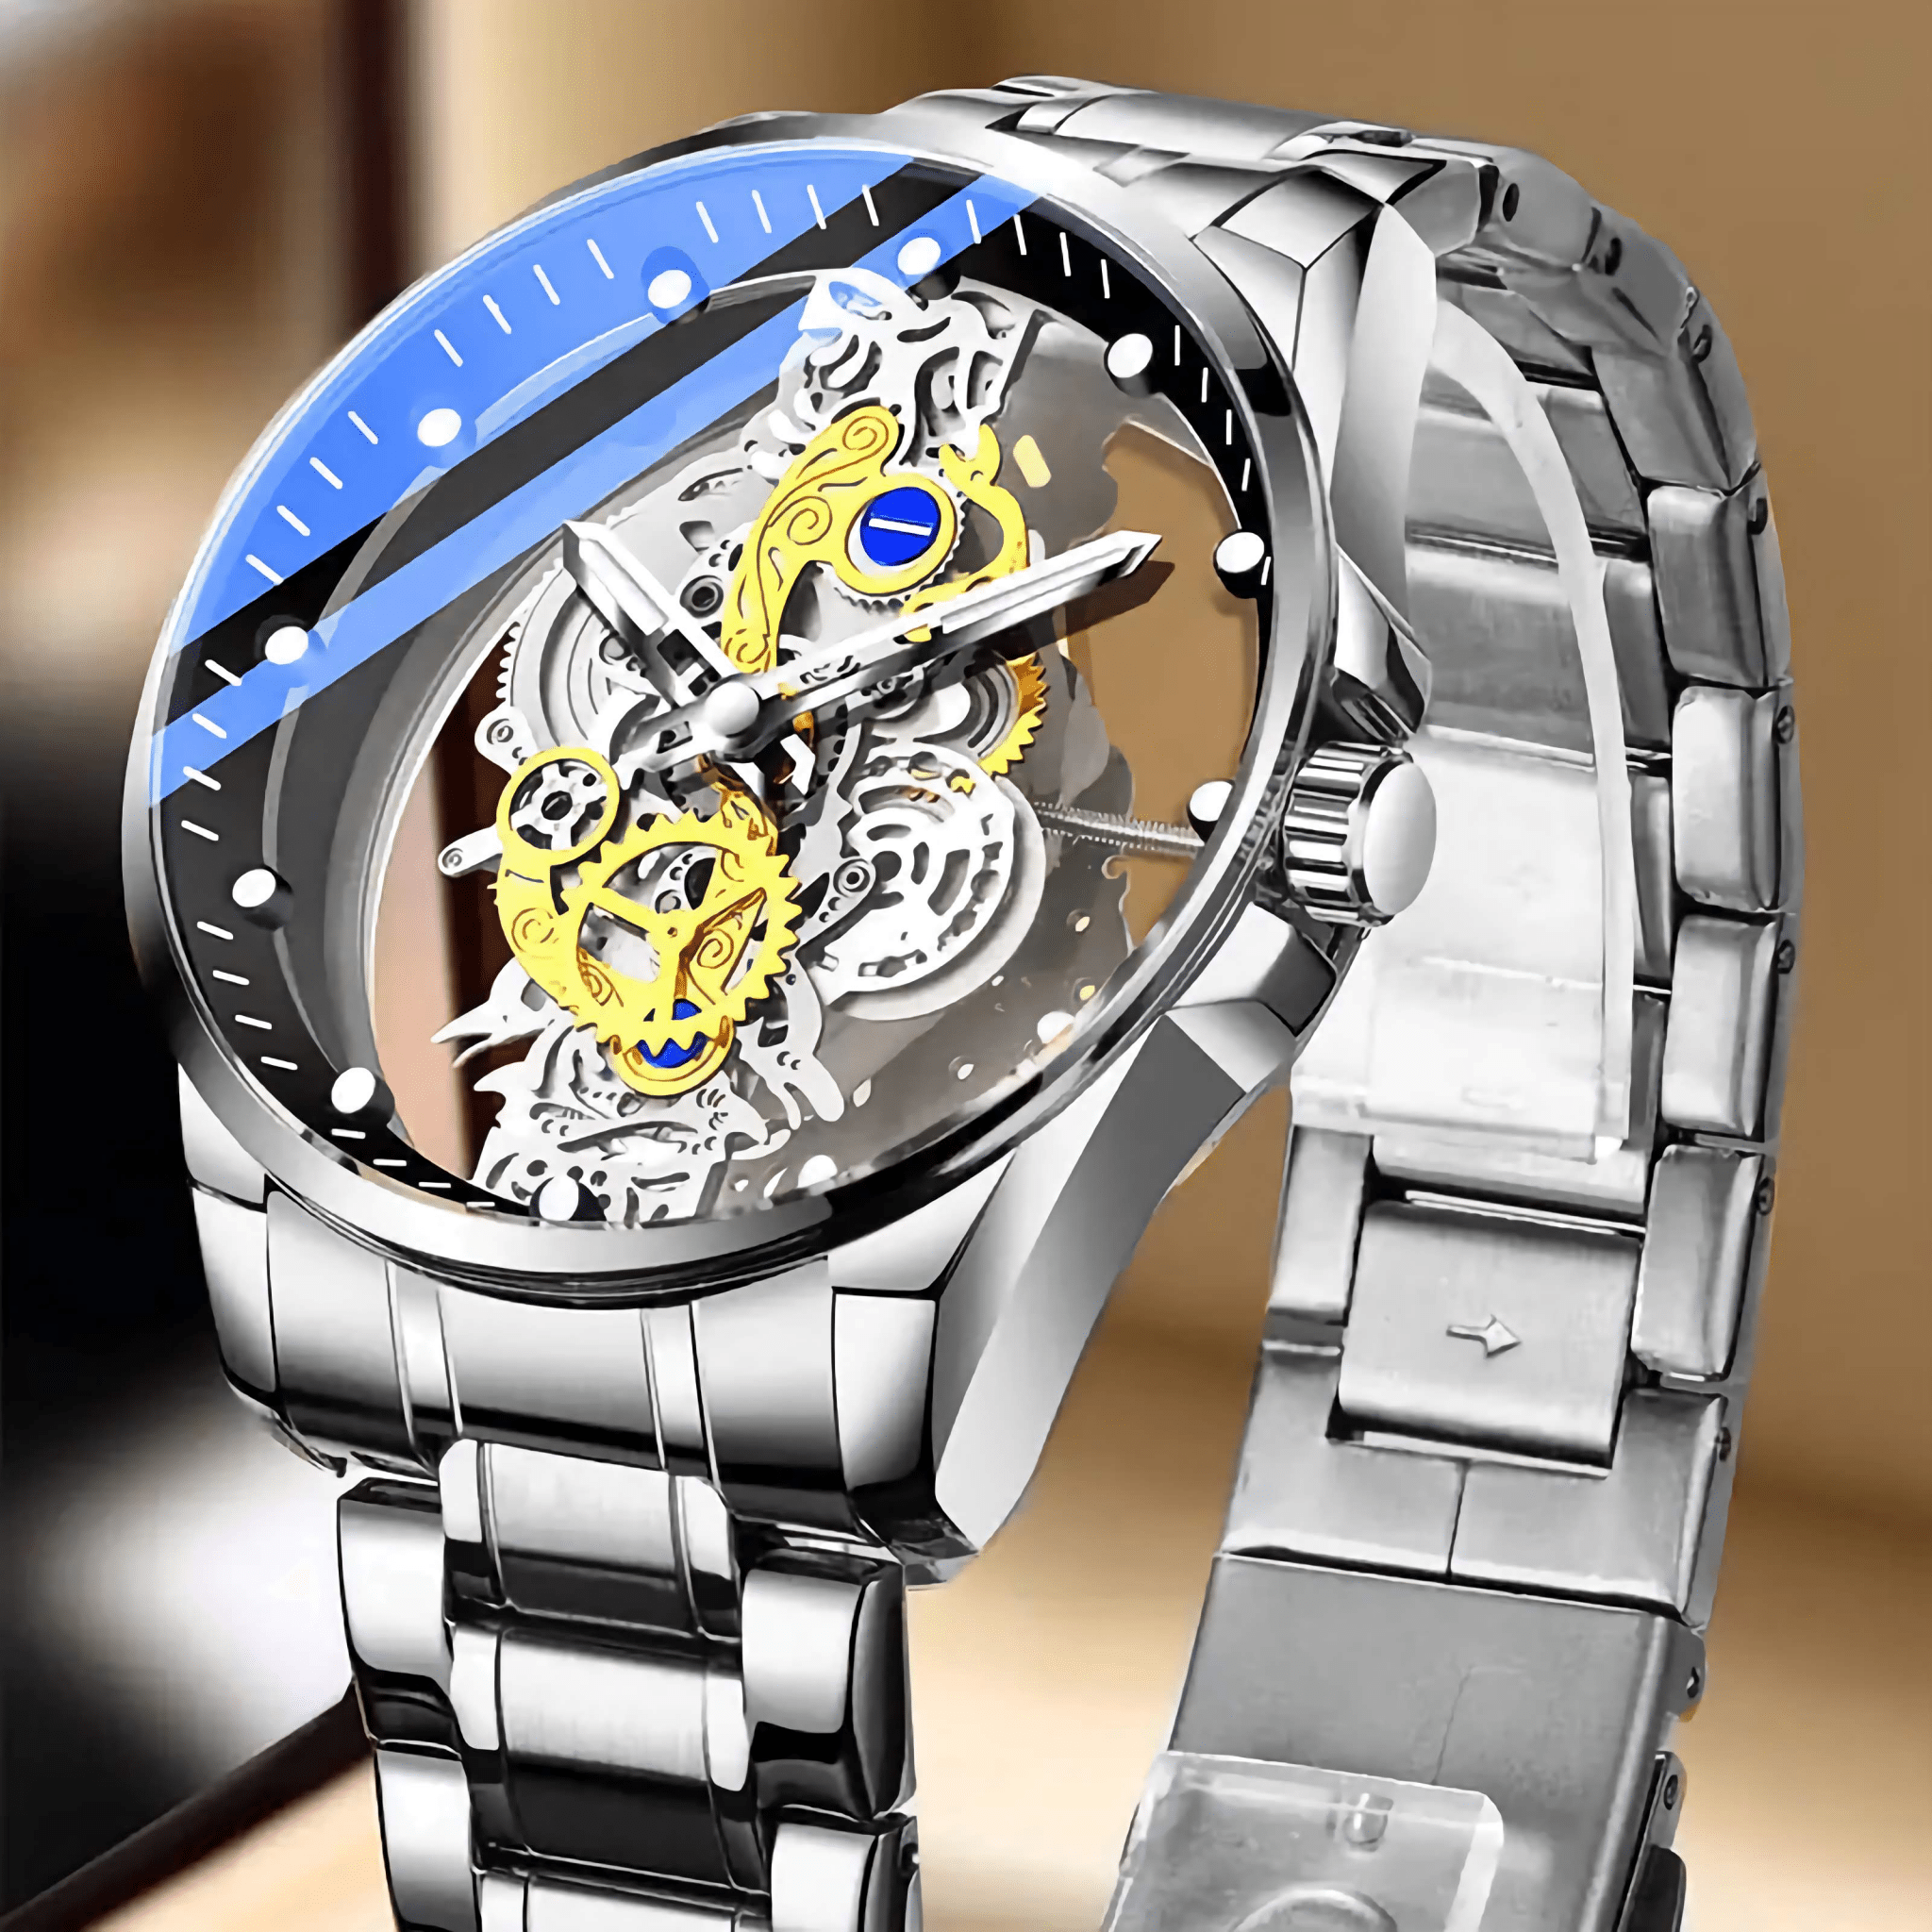 The Skeleton Watch - A&S Direct